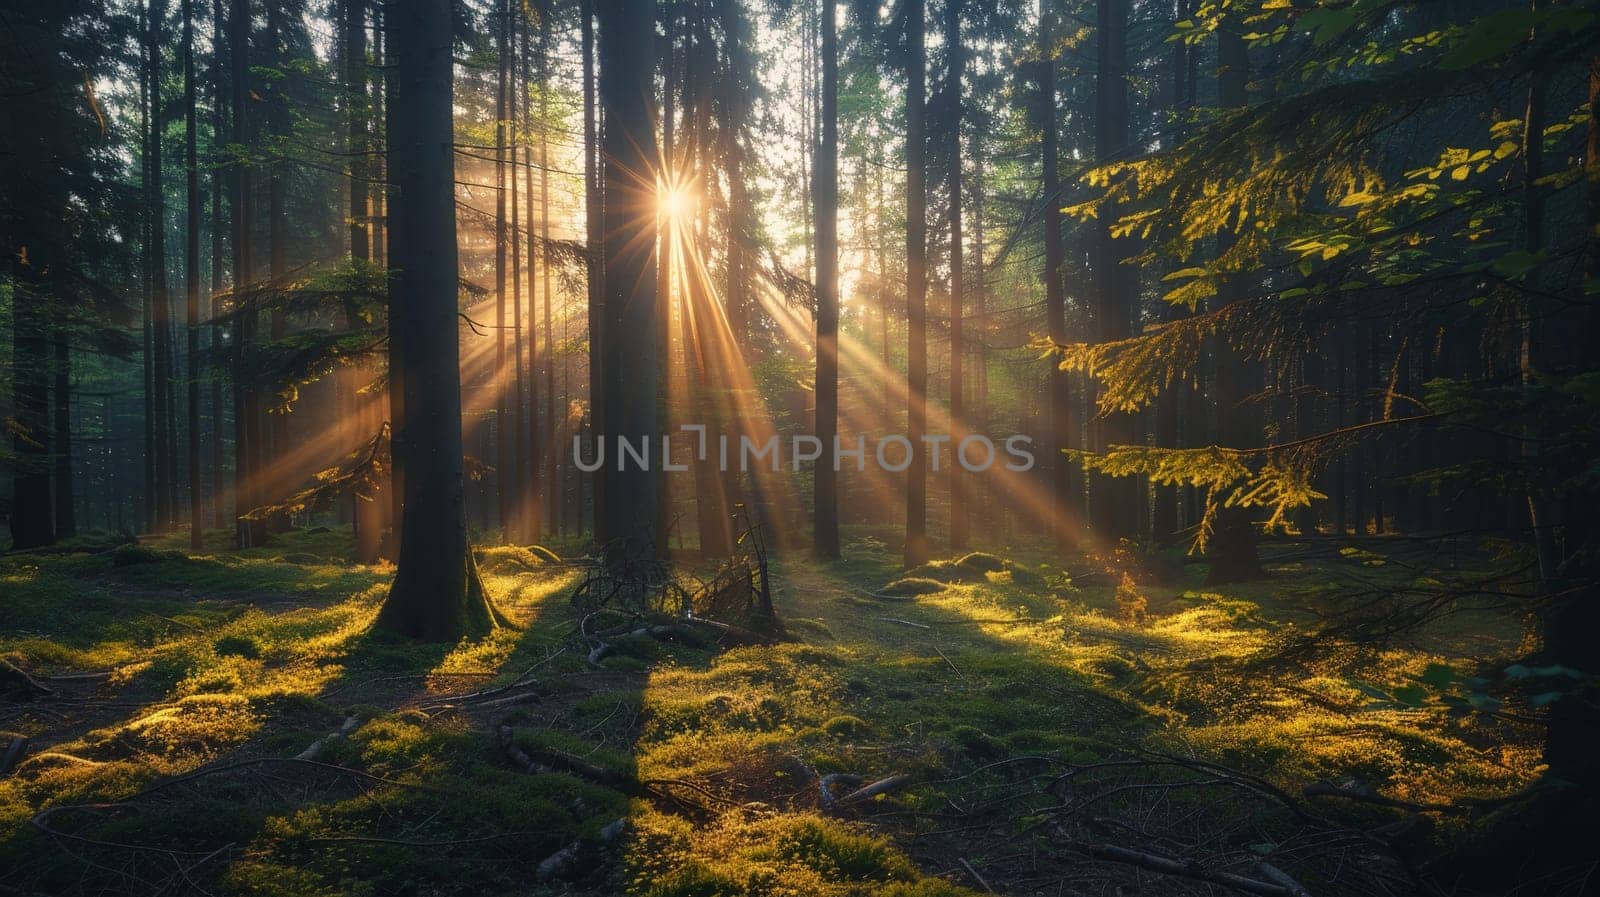 The sun is shining through the trees, casting a warm glow on the forest floor. The light is creating a peaceful and serene atmosphere, making it a perfect place to relax and unwind